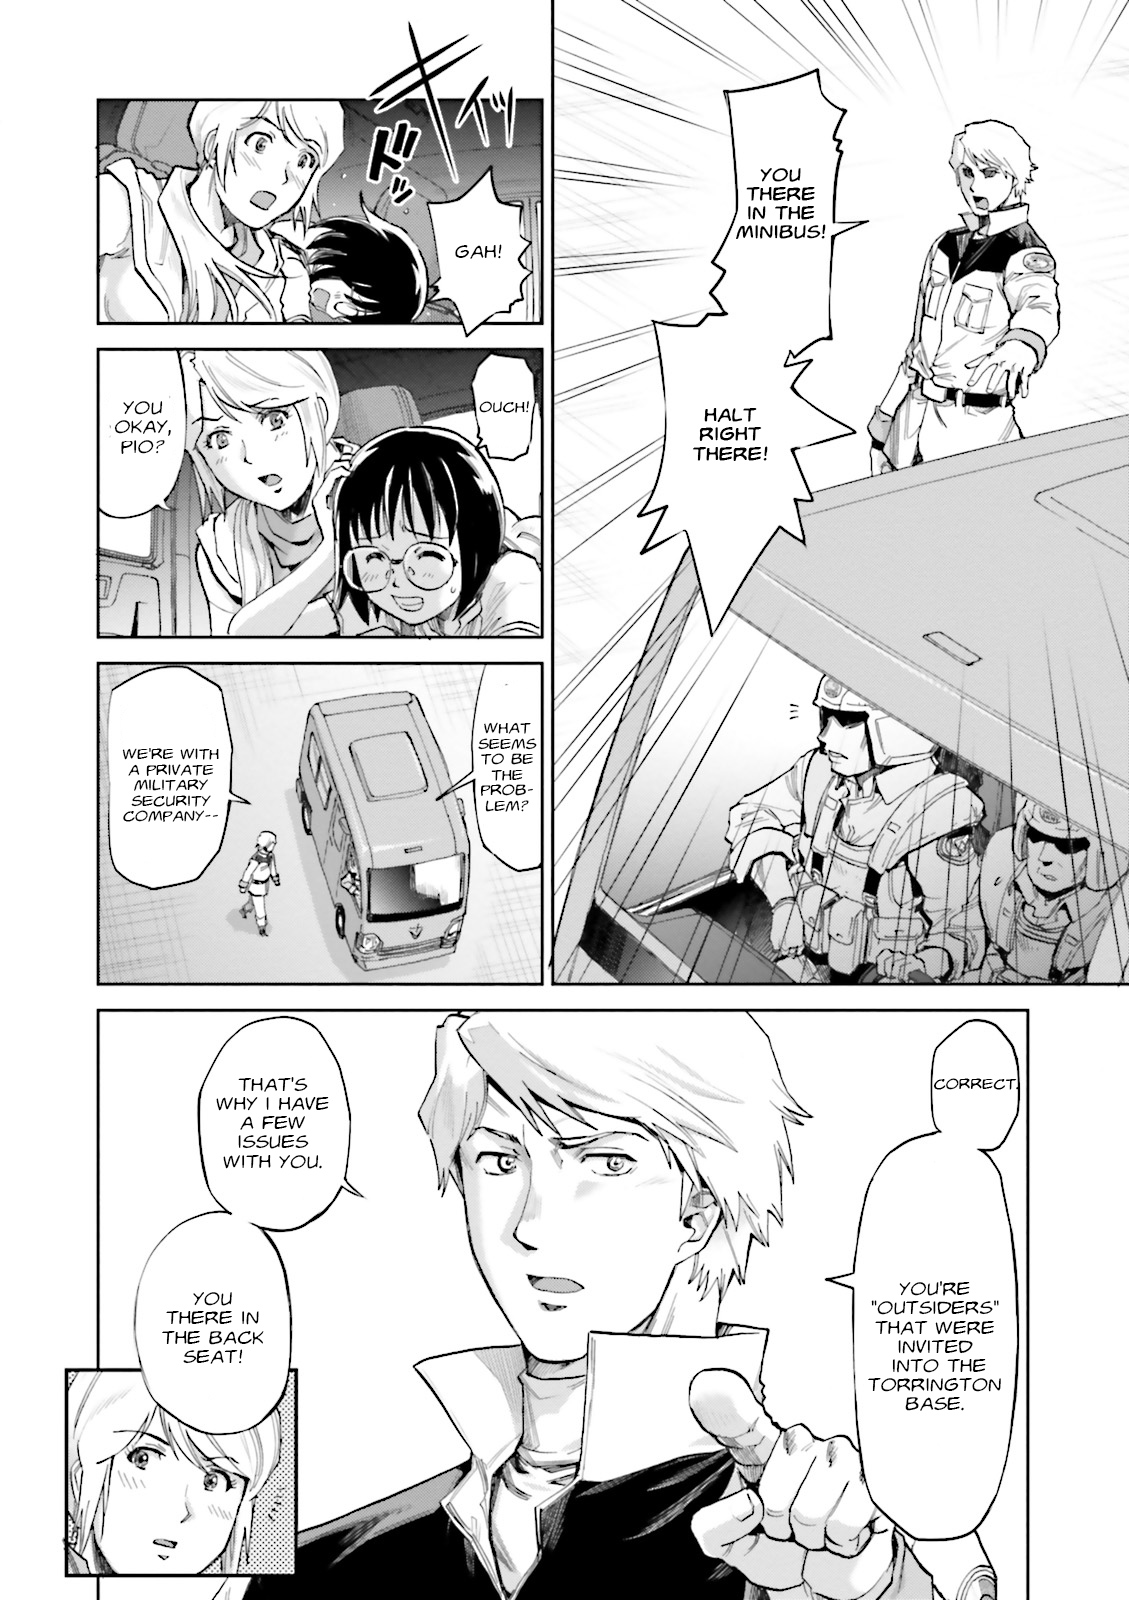 Mobile Suit Gundam Ground Zero - Rise From The Ashes Vol.1 Chapter 1: Moving Out - Picture 3